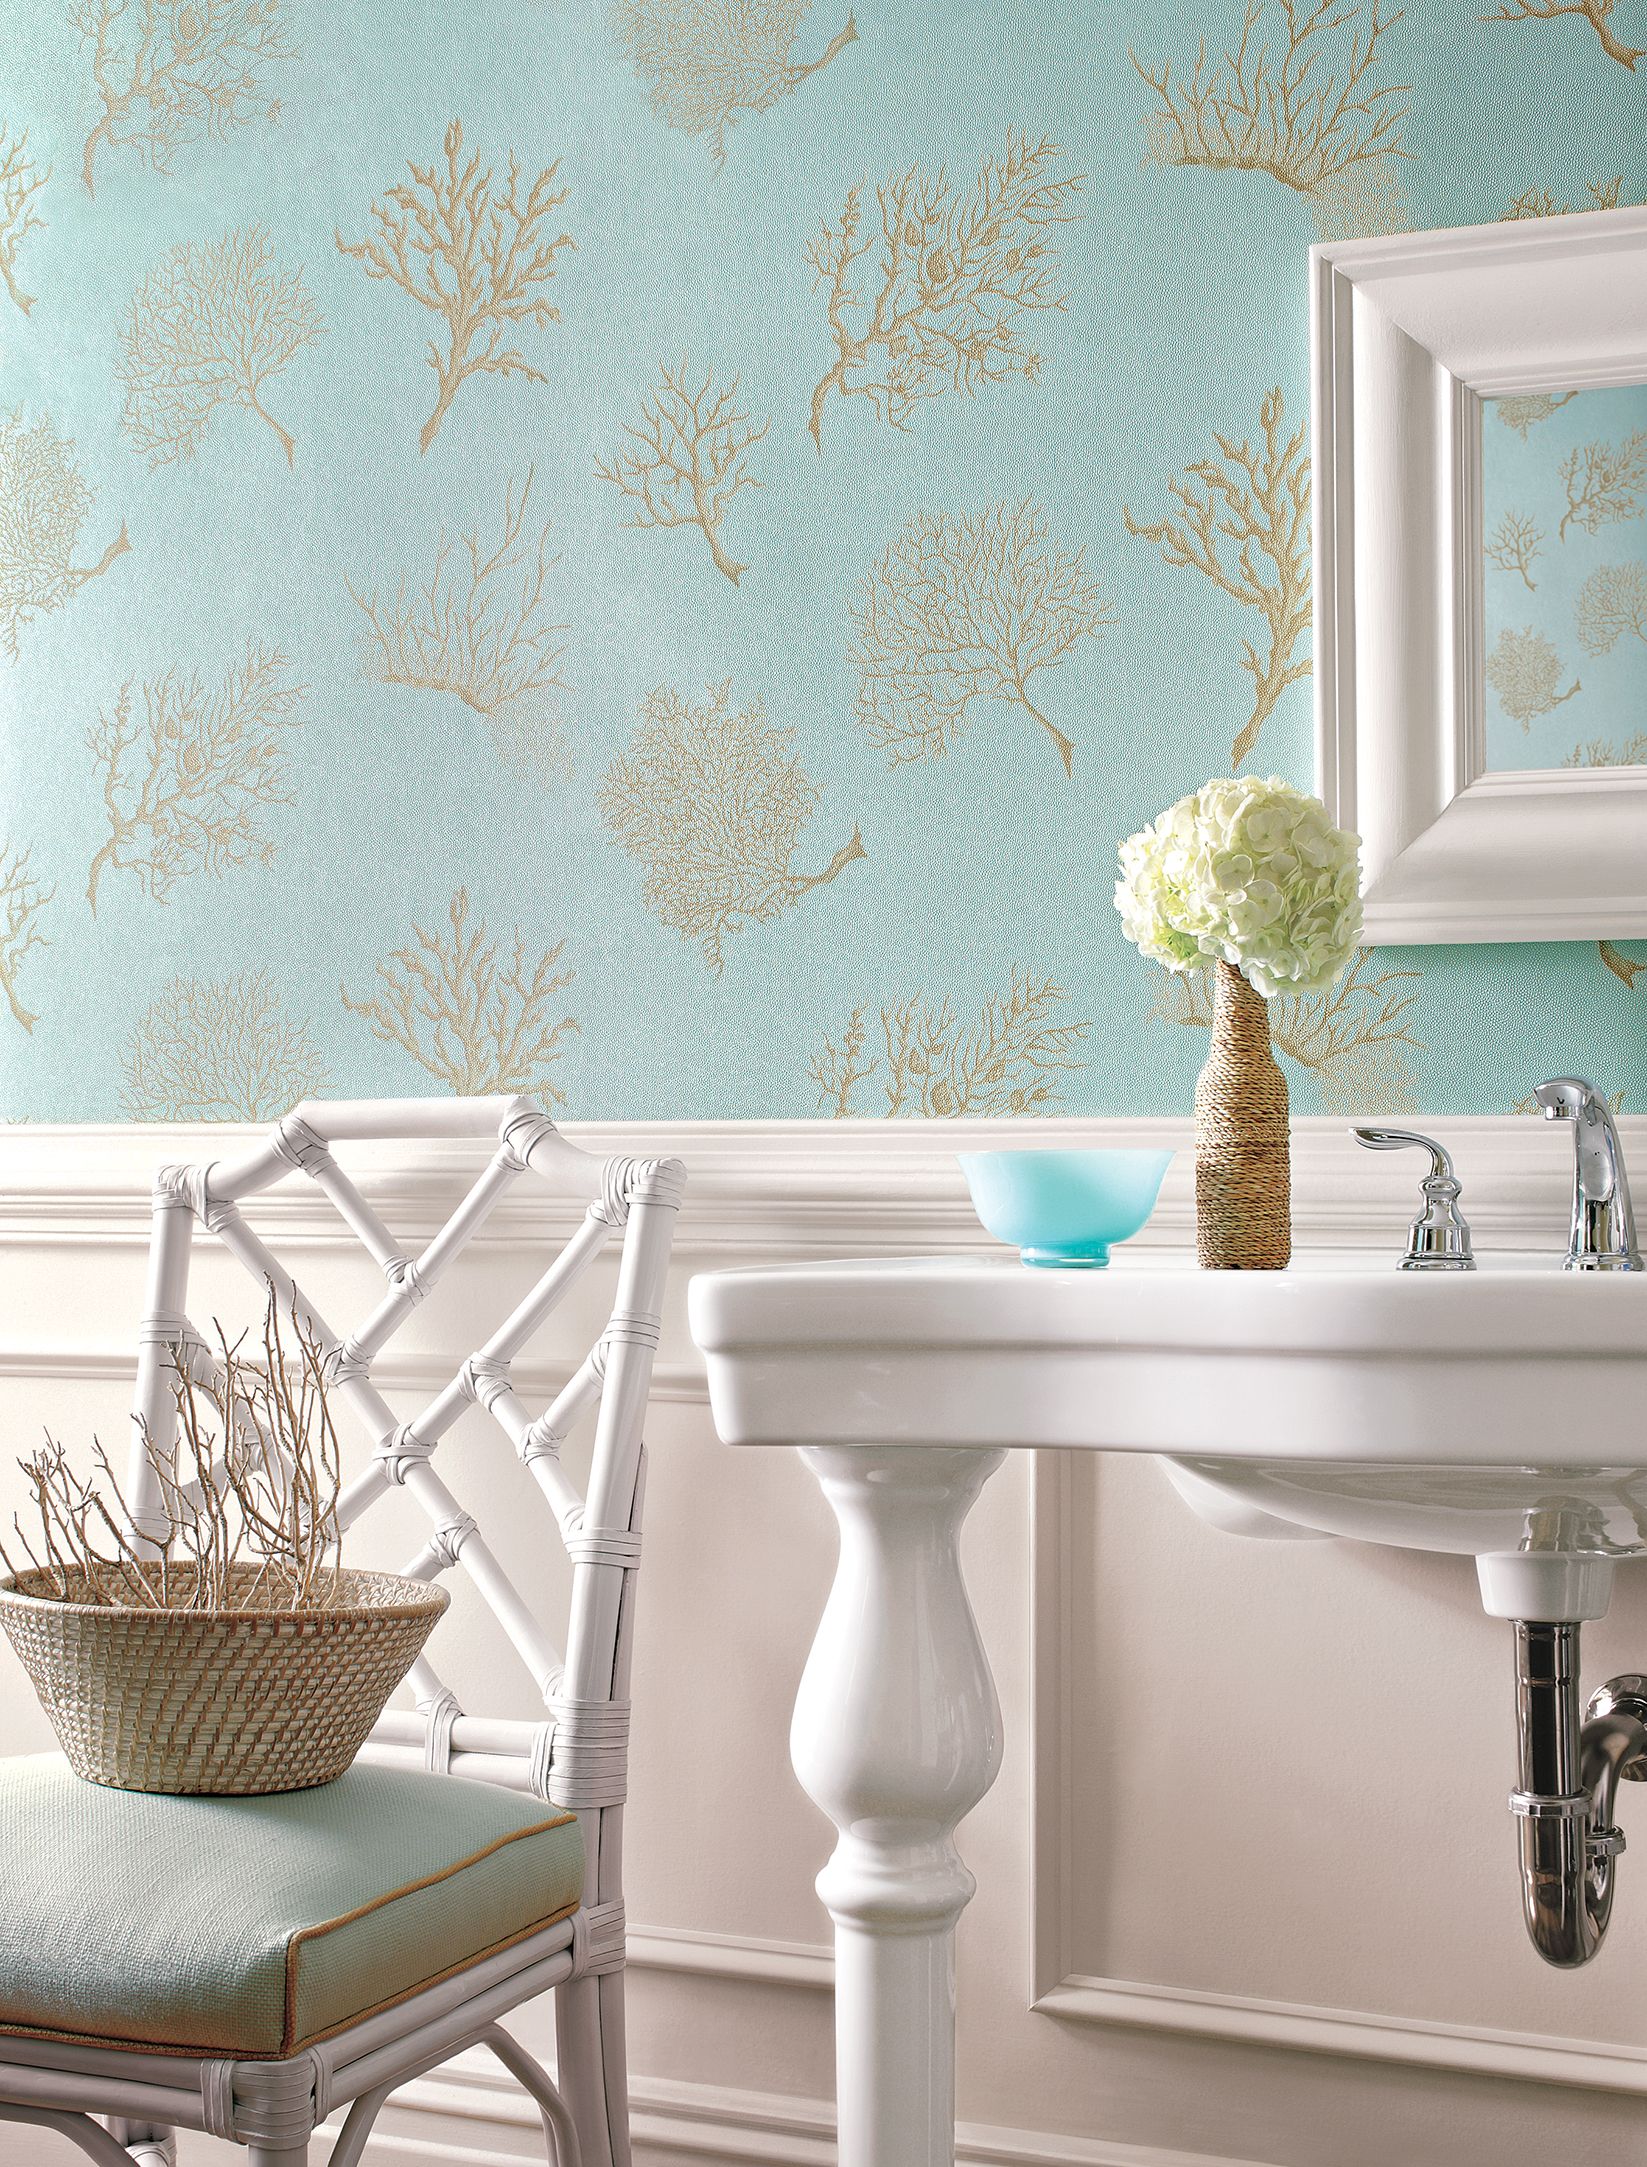 All About Wallpaper - This Old House